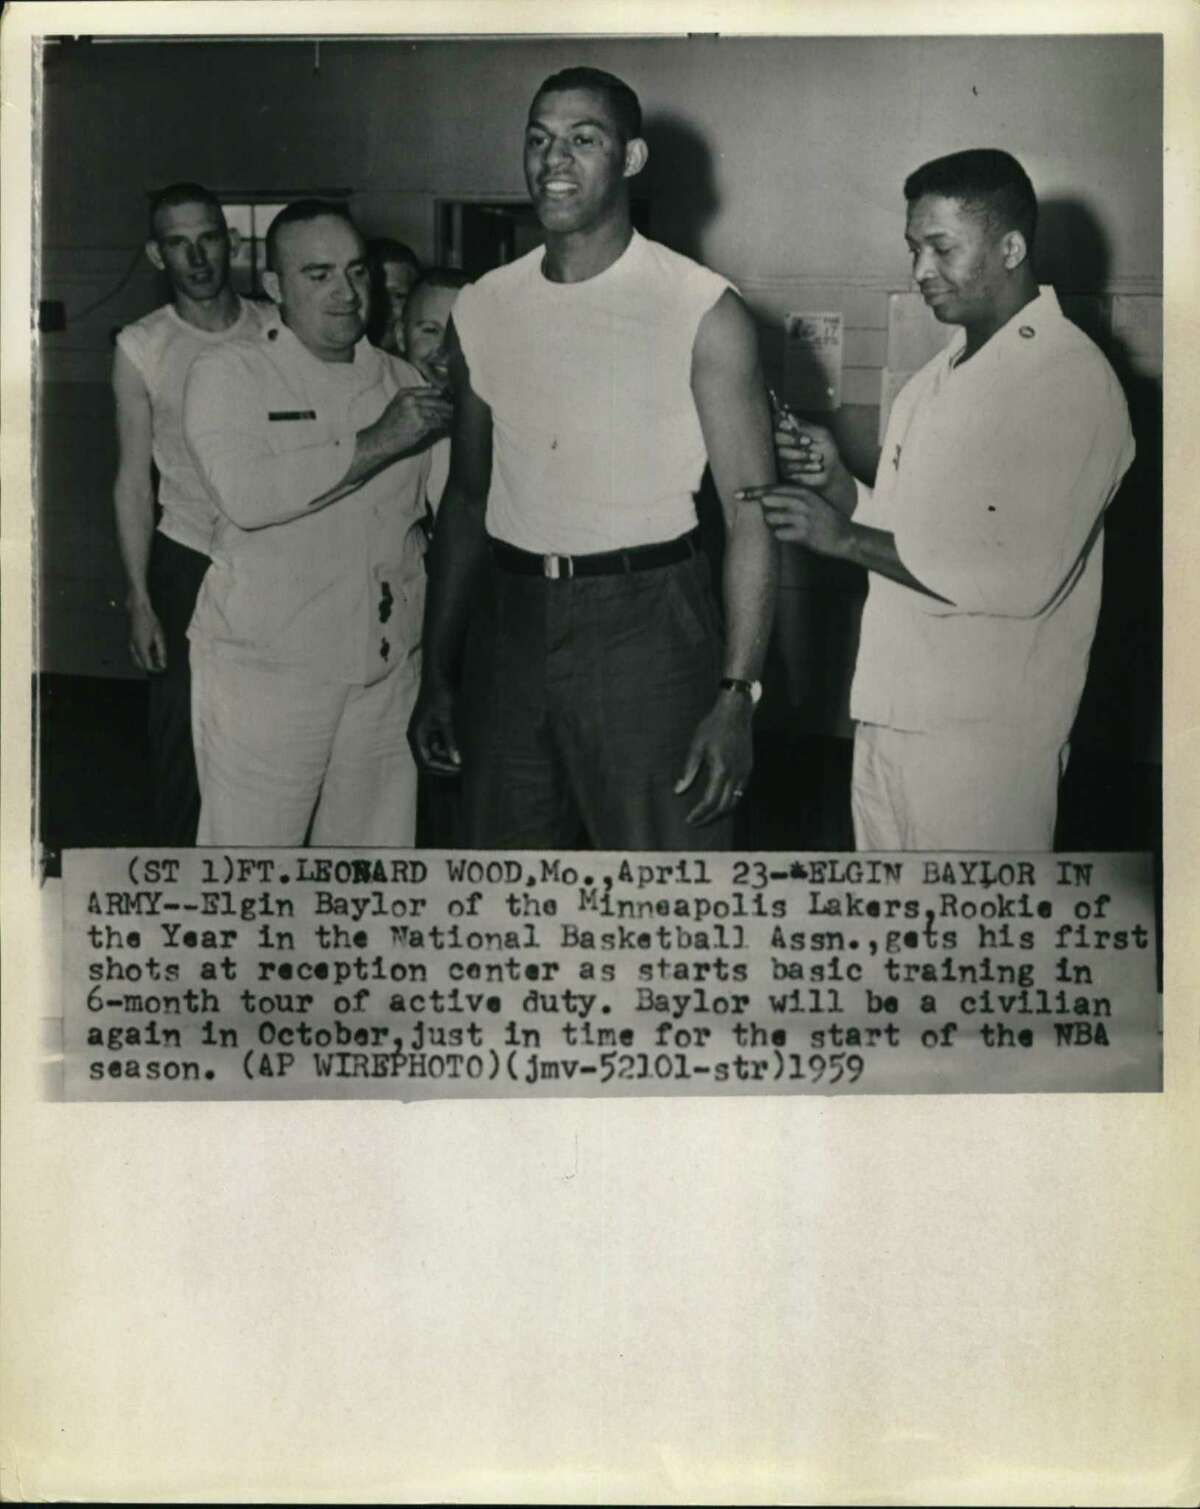 Elgin Baylor of the then-Minneapolis Lakers, the National Basketball Association’s Rookie of the Year, gets his first vaccinations April 23, 1959, at Fort Leonard Wood, Mo. In July and August, he was in San Antonio at Fort Sam Houston to train as a medical corpsman during a 6-month tour of active duty. He became a civilian again in October, just in time for the start of the NBA season.